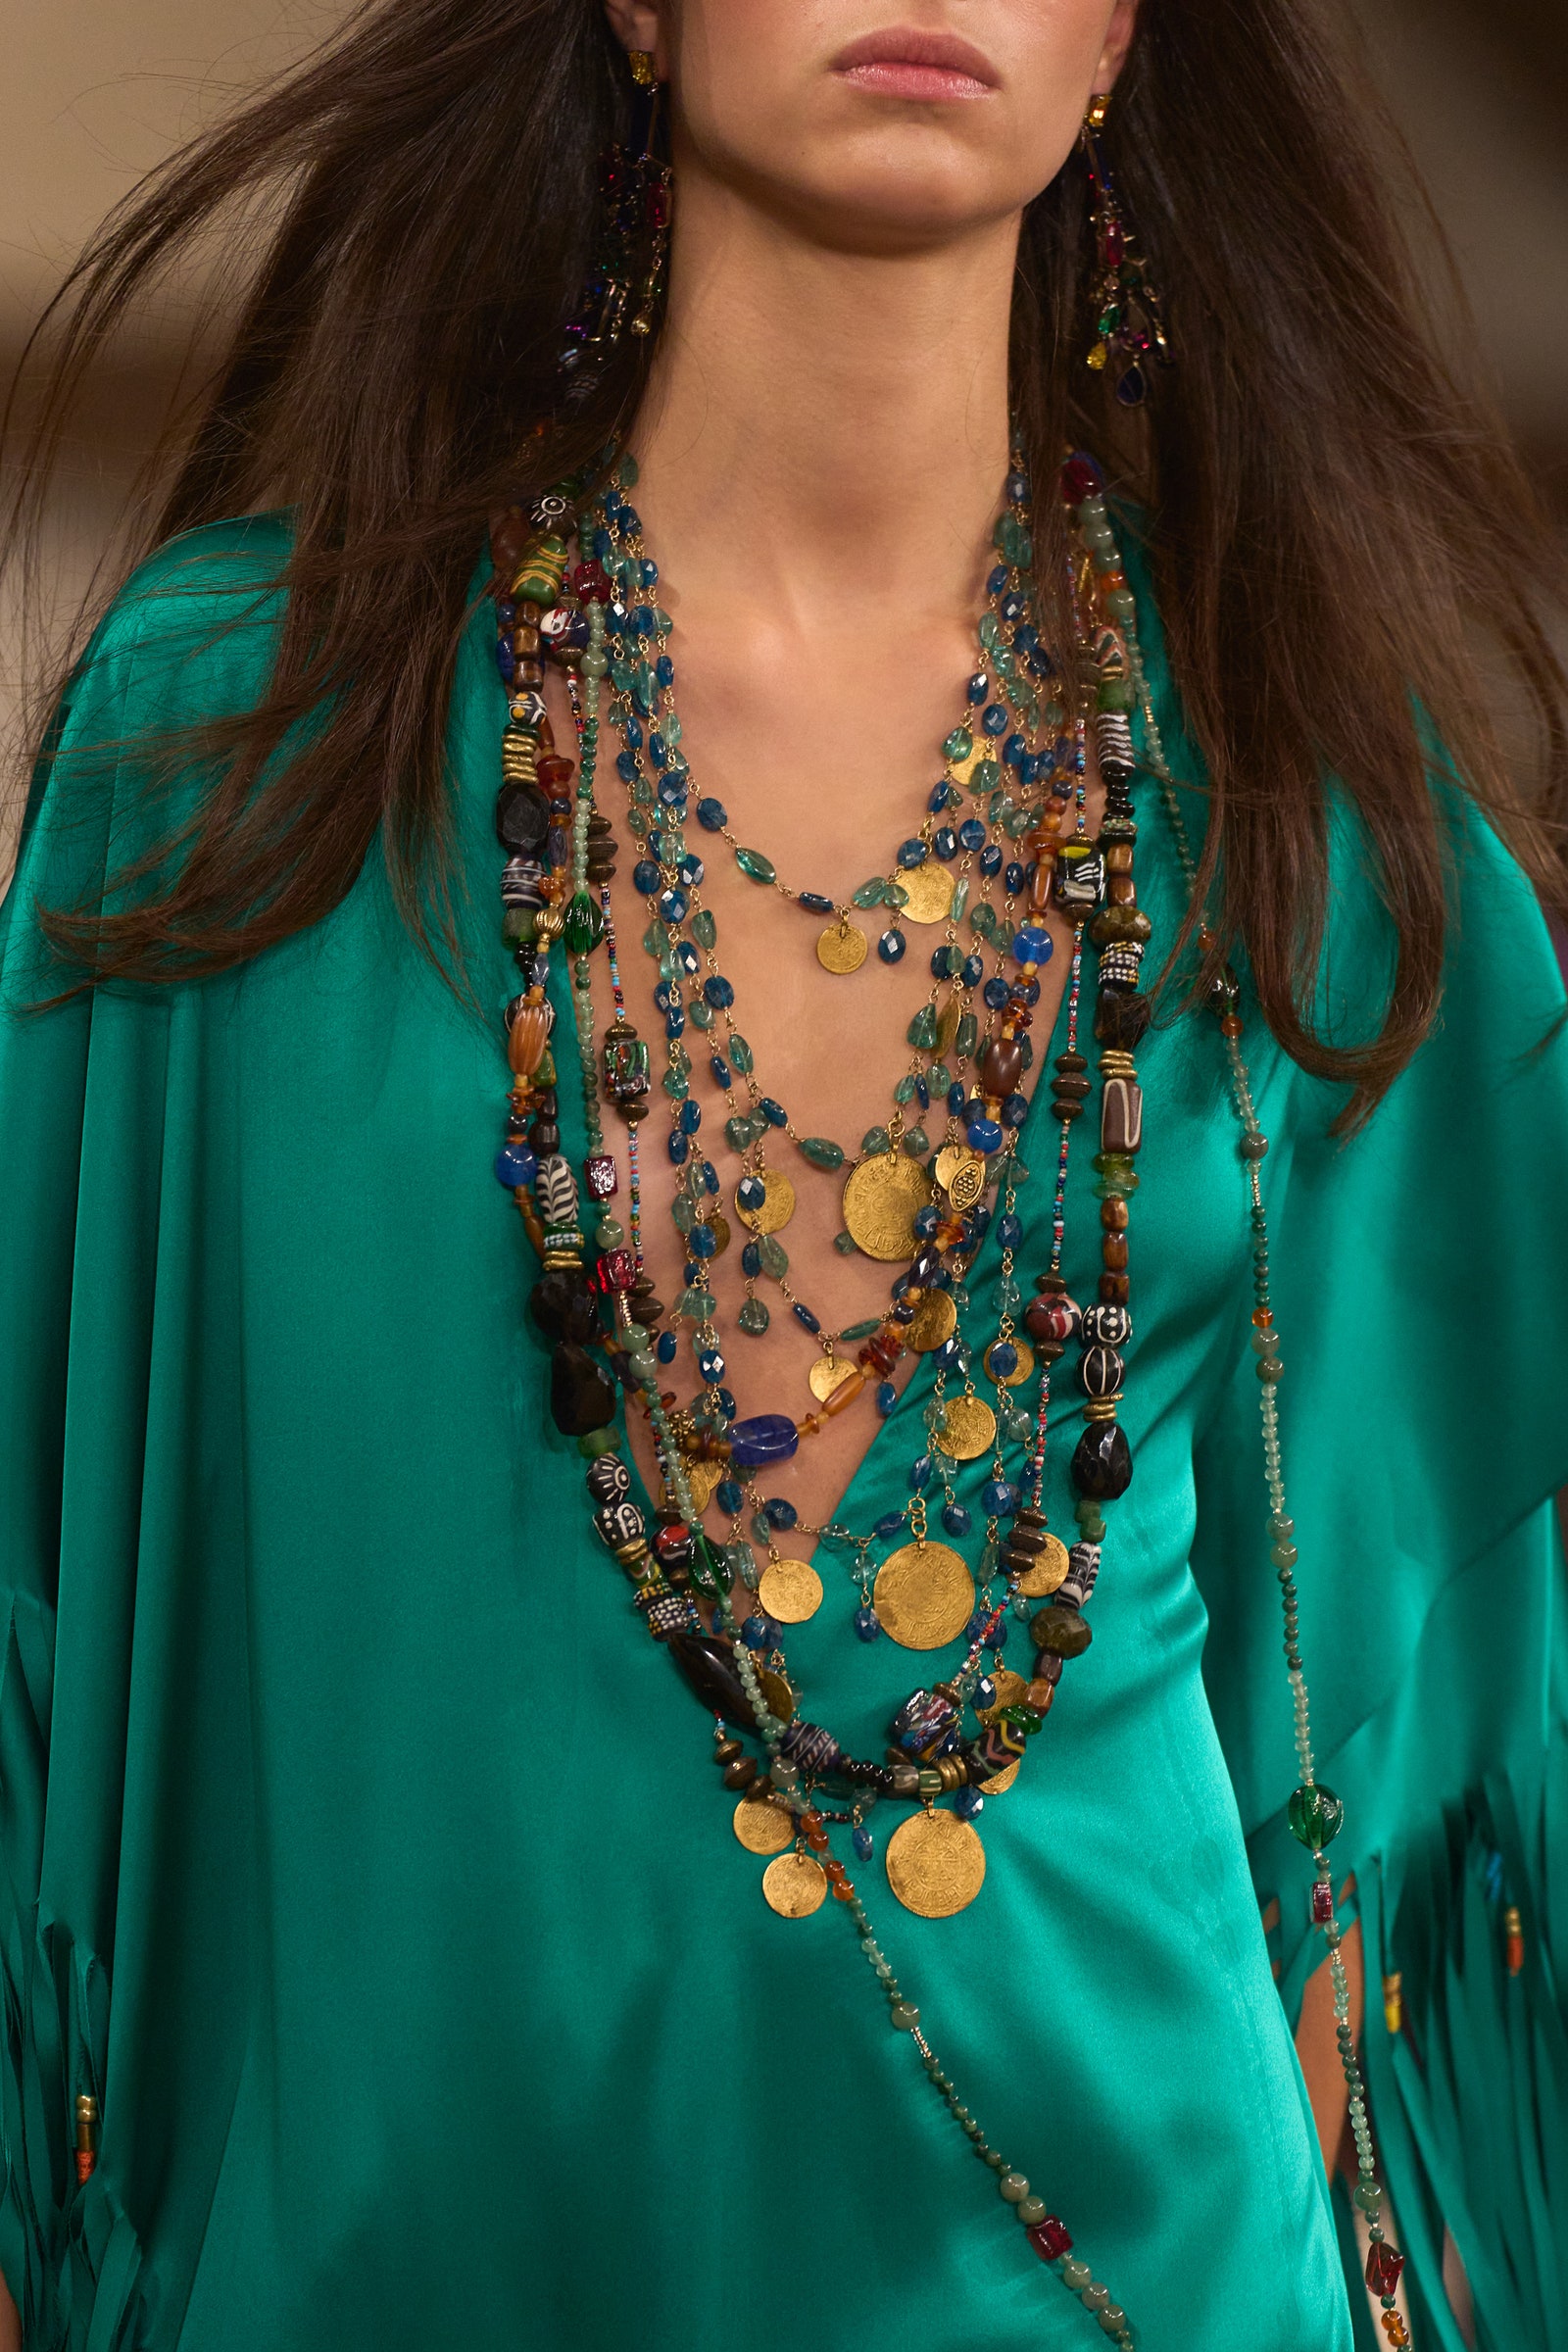 A cascade of vibrant, eclectic beads and coins flows in a symphony of colour against a striking teal backdrop. This detail from Ralph Lauren's Spring 2024 Ready-to-Wear collection captures a bohemian rhapsody, with layers of necklaces offering a rich palette of textures and hues, evoking the spirit of adventure and the art of personal expression.